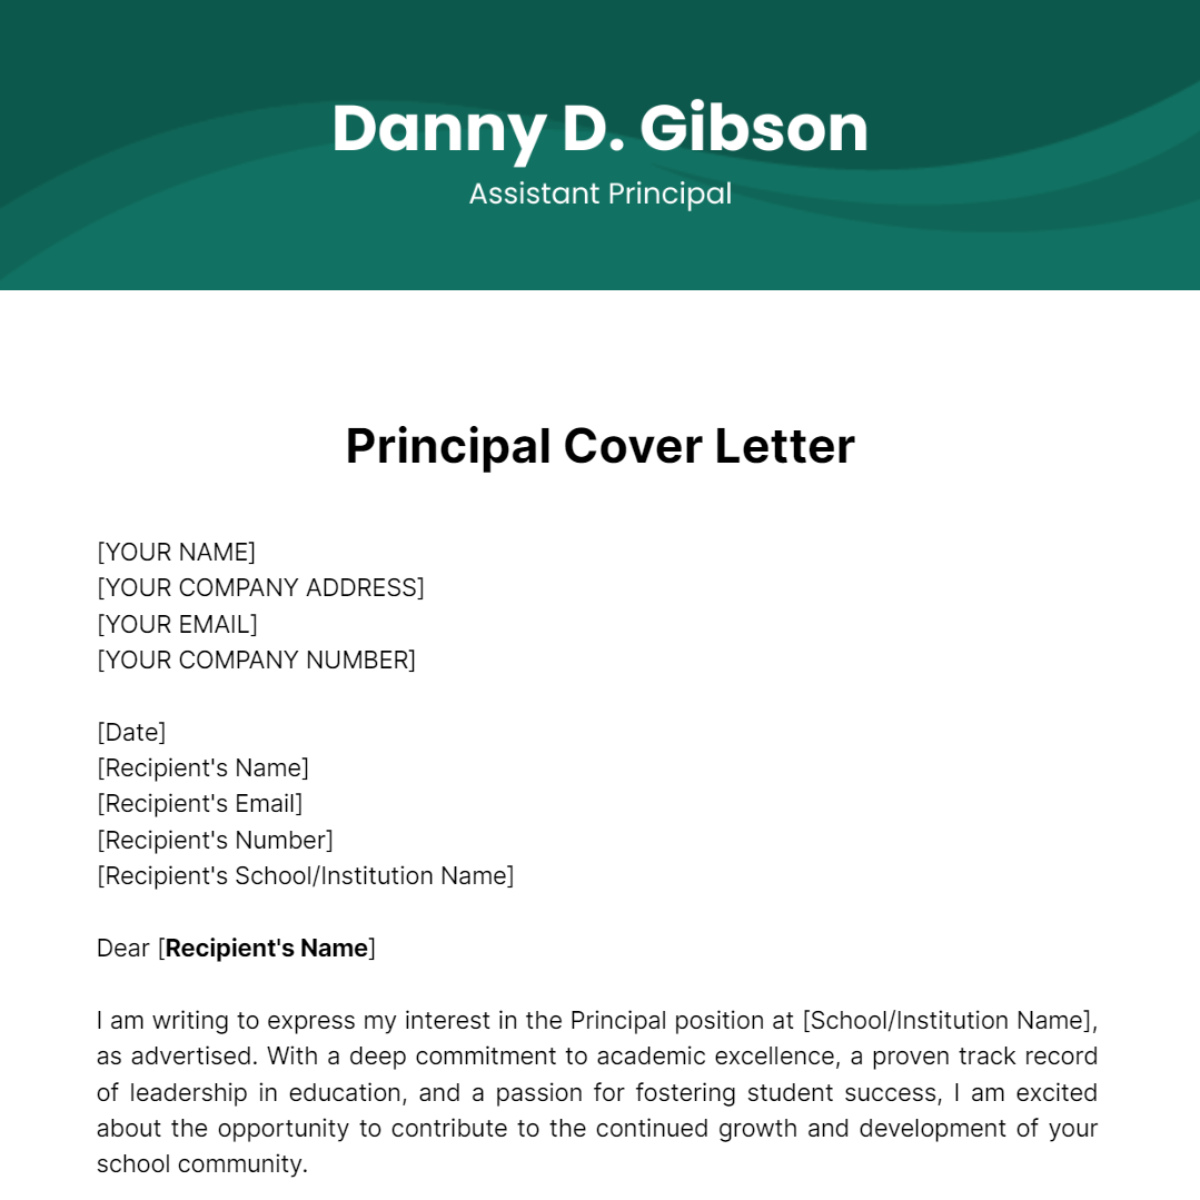 Principal Cover Letter Template